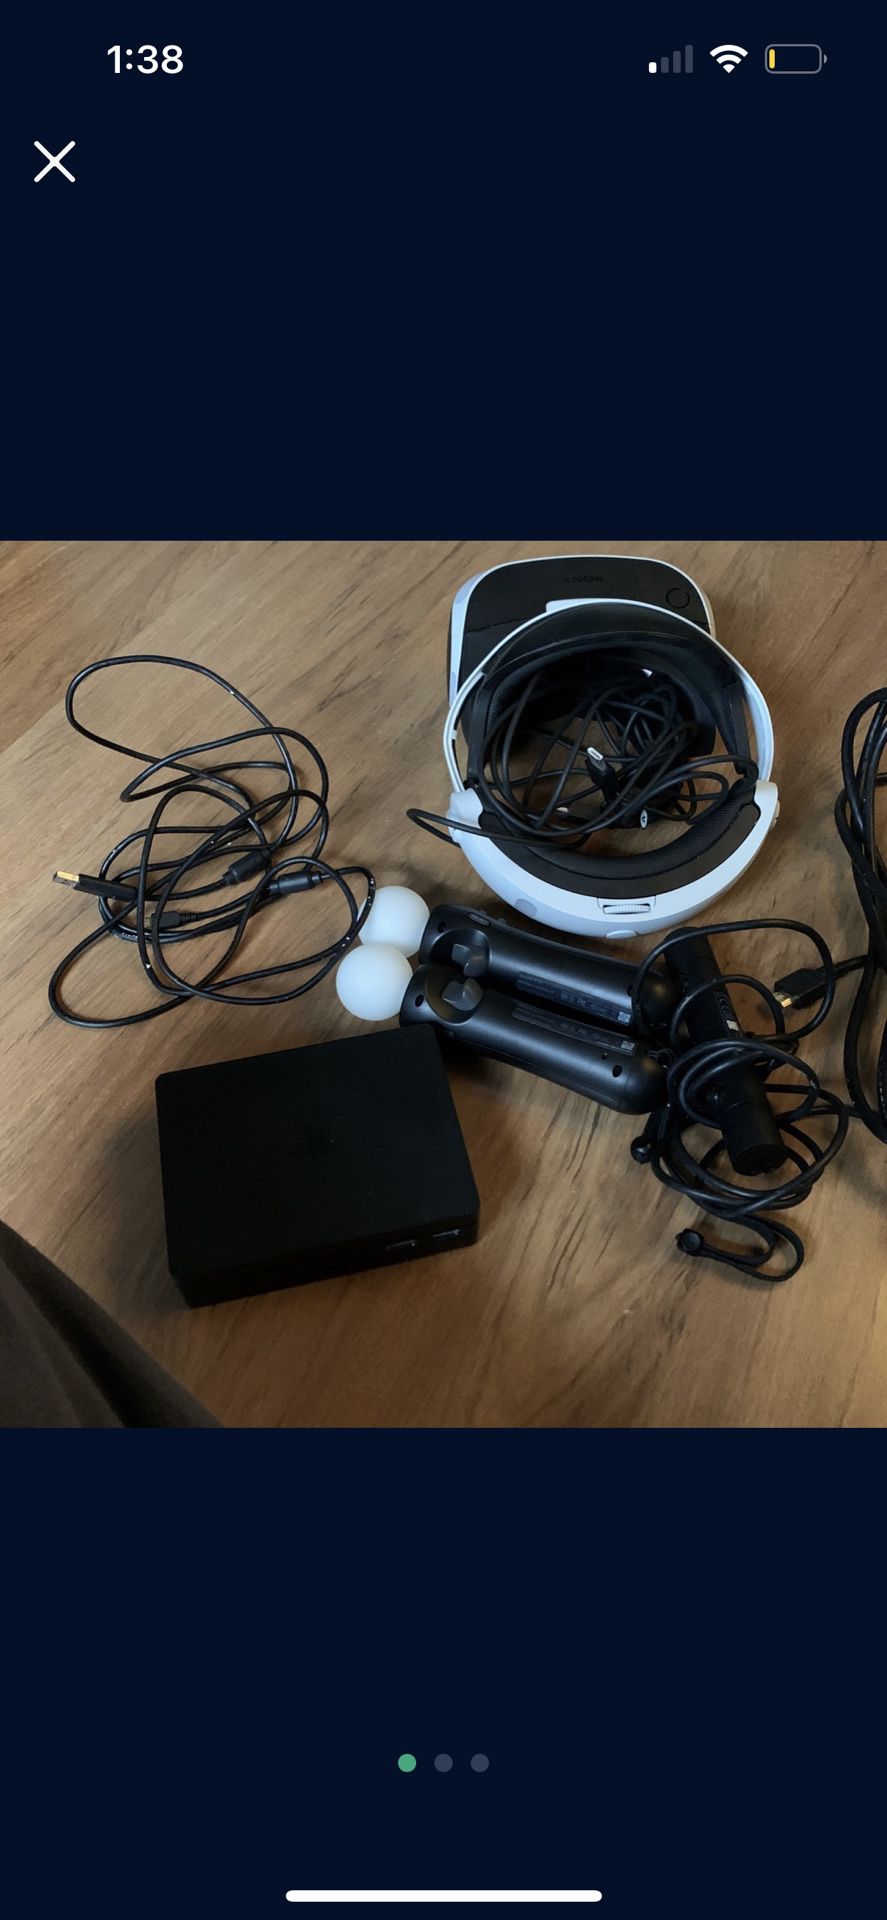 PSVR WITH CAMERA AND 2 MOTION CONTROLLERS